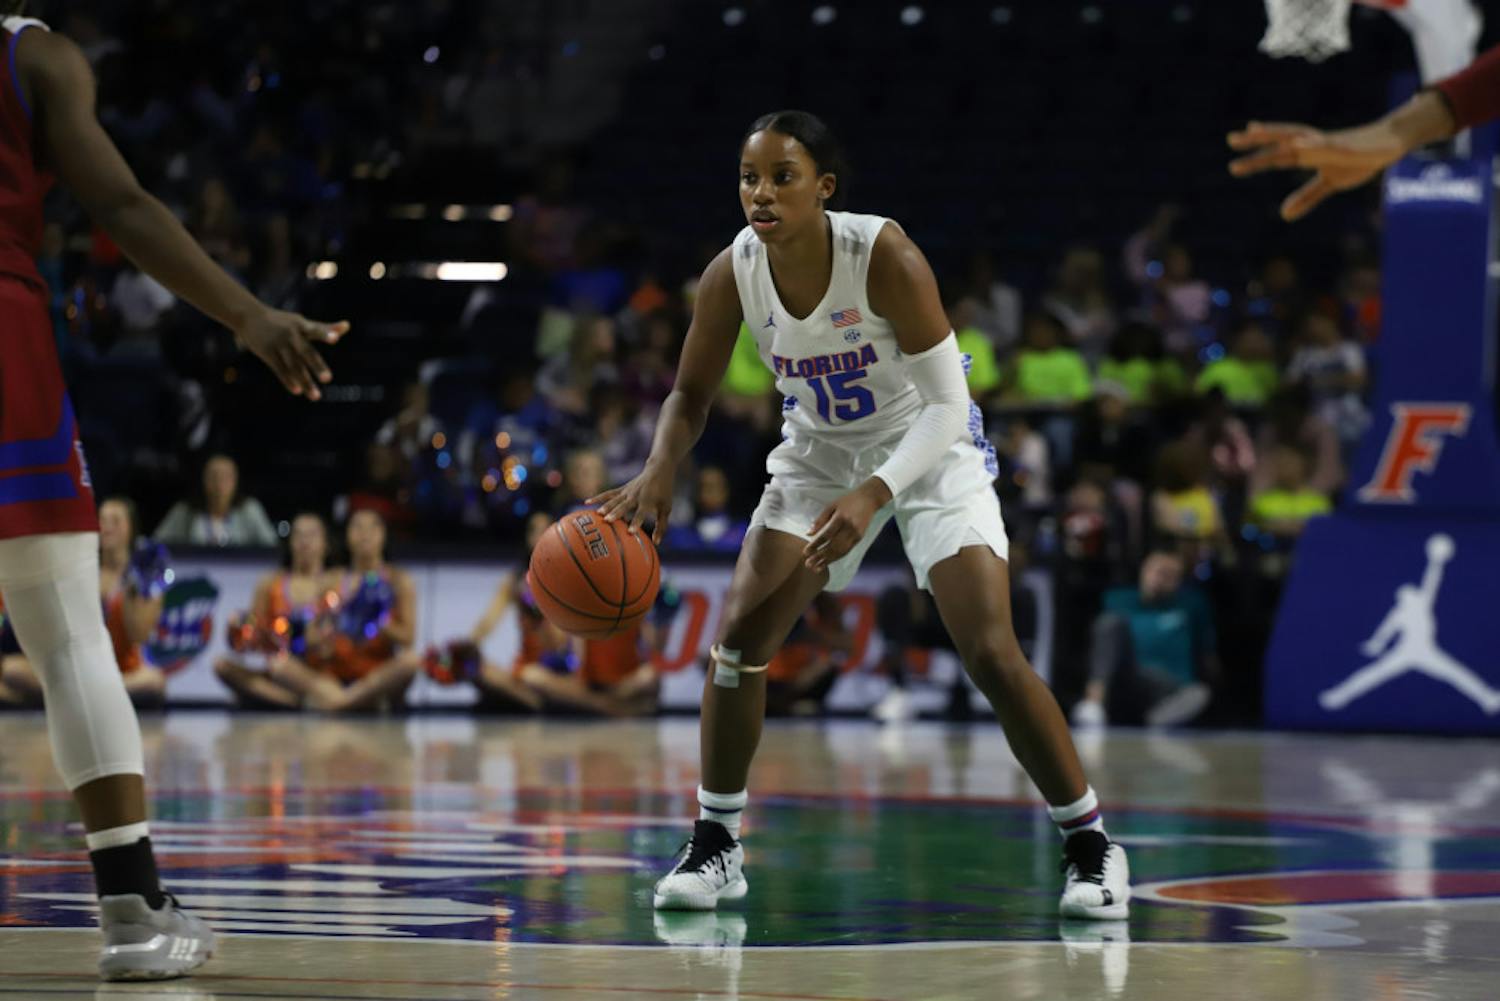 Sophomore Nina Rickards had nine points, eight rebounds and two assists in the Gators first game of the 2020-2021 season.